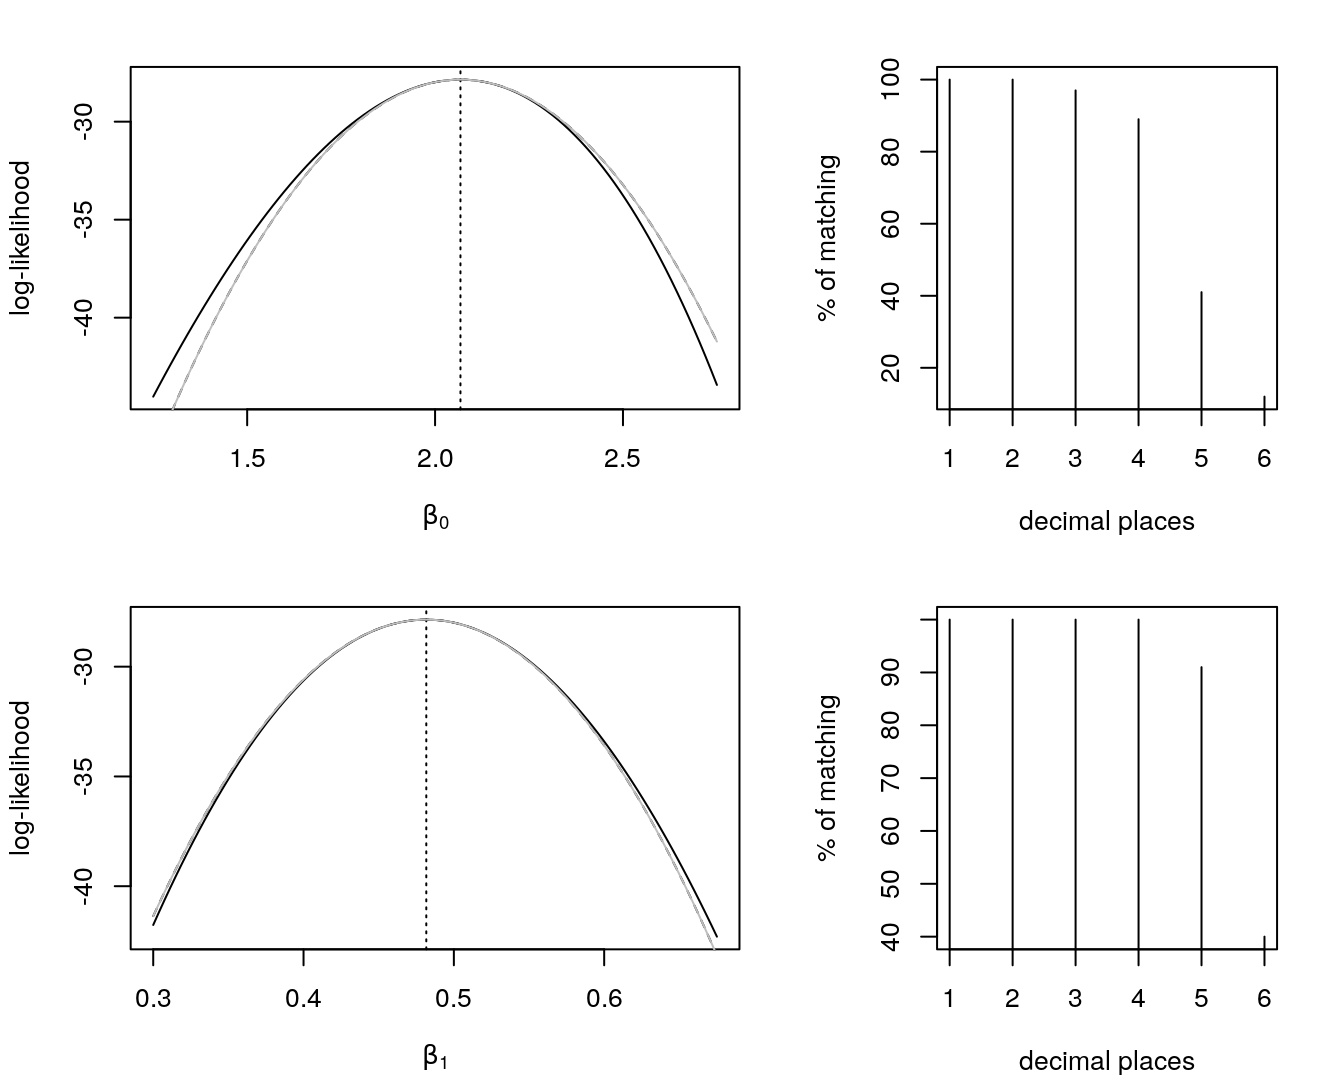 Profile log-likelihoods, solid line, for \(\beta_{0}\) and \(\beta_{1}\) in a Poisson regression. In dotted, MLEs. Quadratic approx.'s of the profiles in black dashed and gray, with a matching percentage between them considering six different decimal places.